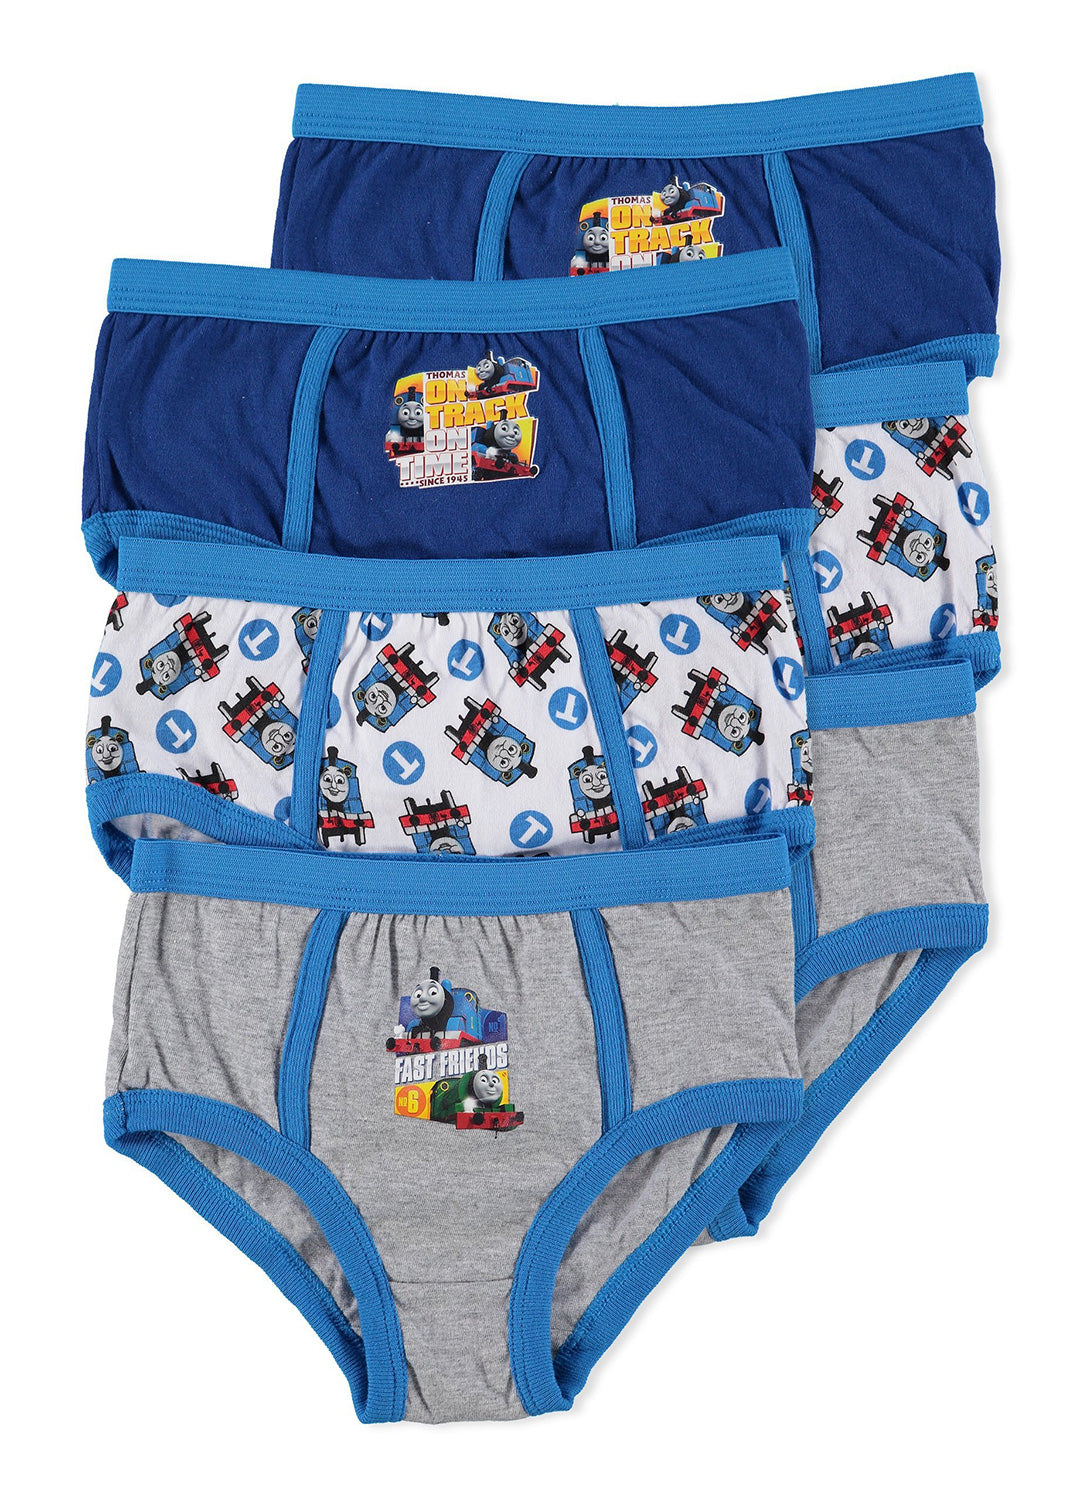 6 Boy Briefs  with Thomas and Friends print